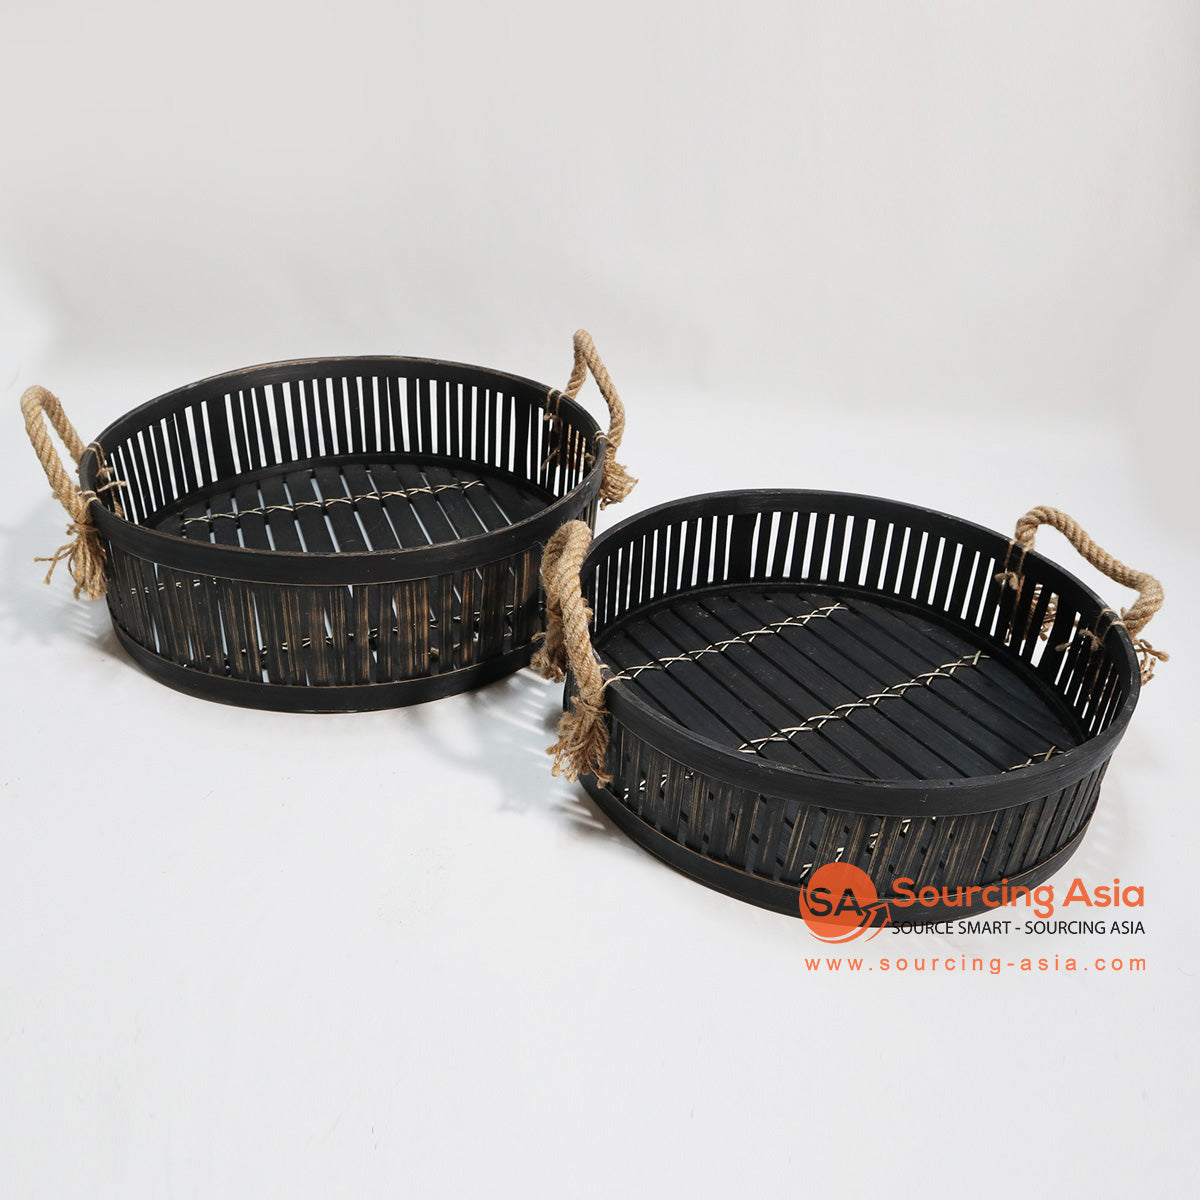 HBSC112 SET OF TWO BLACK BAMBOO TRAYS WITH NATURAL HANDLE